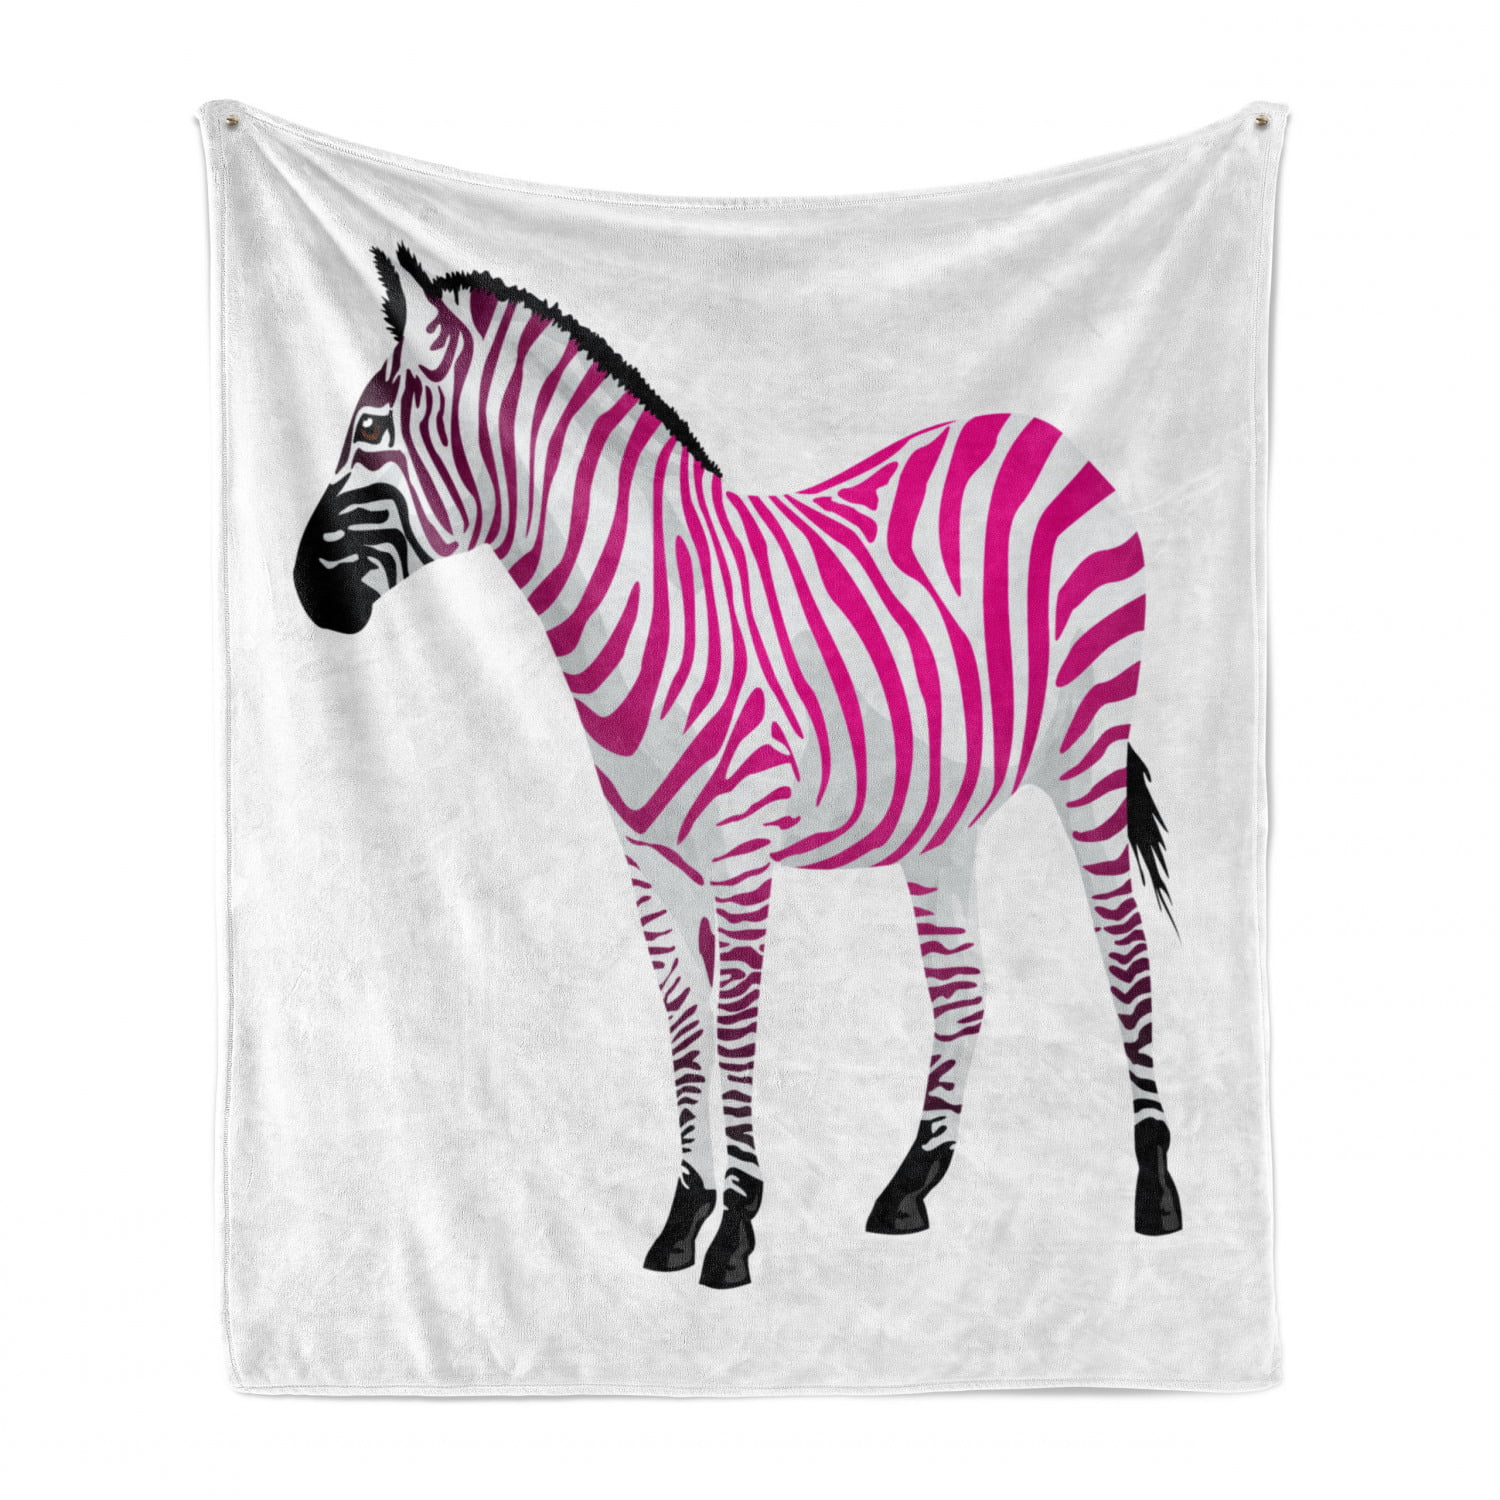 Zebra Colorful Pattern Flannel Blanket,Soft Bedding Fleece Throw Couch Cover Decorative Blanket for Home Bed Sofa & Dorm 60x50